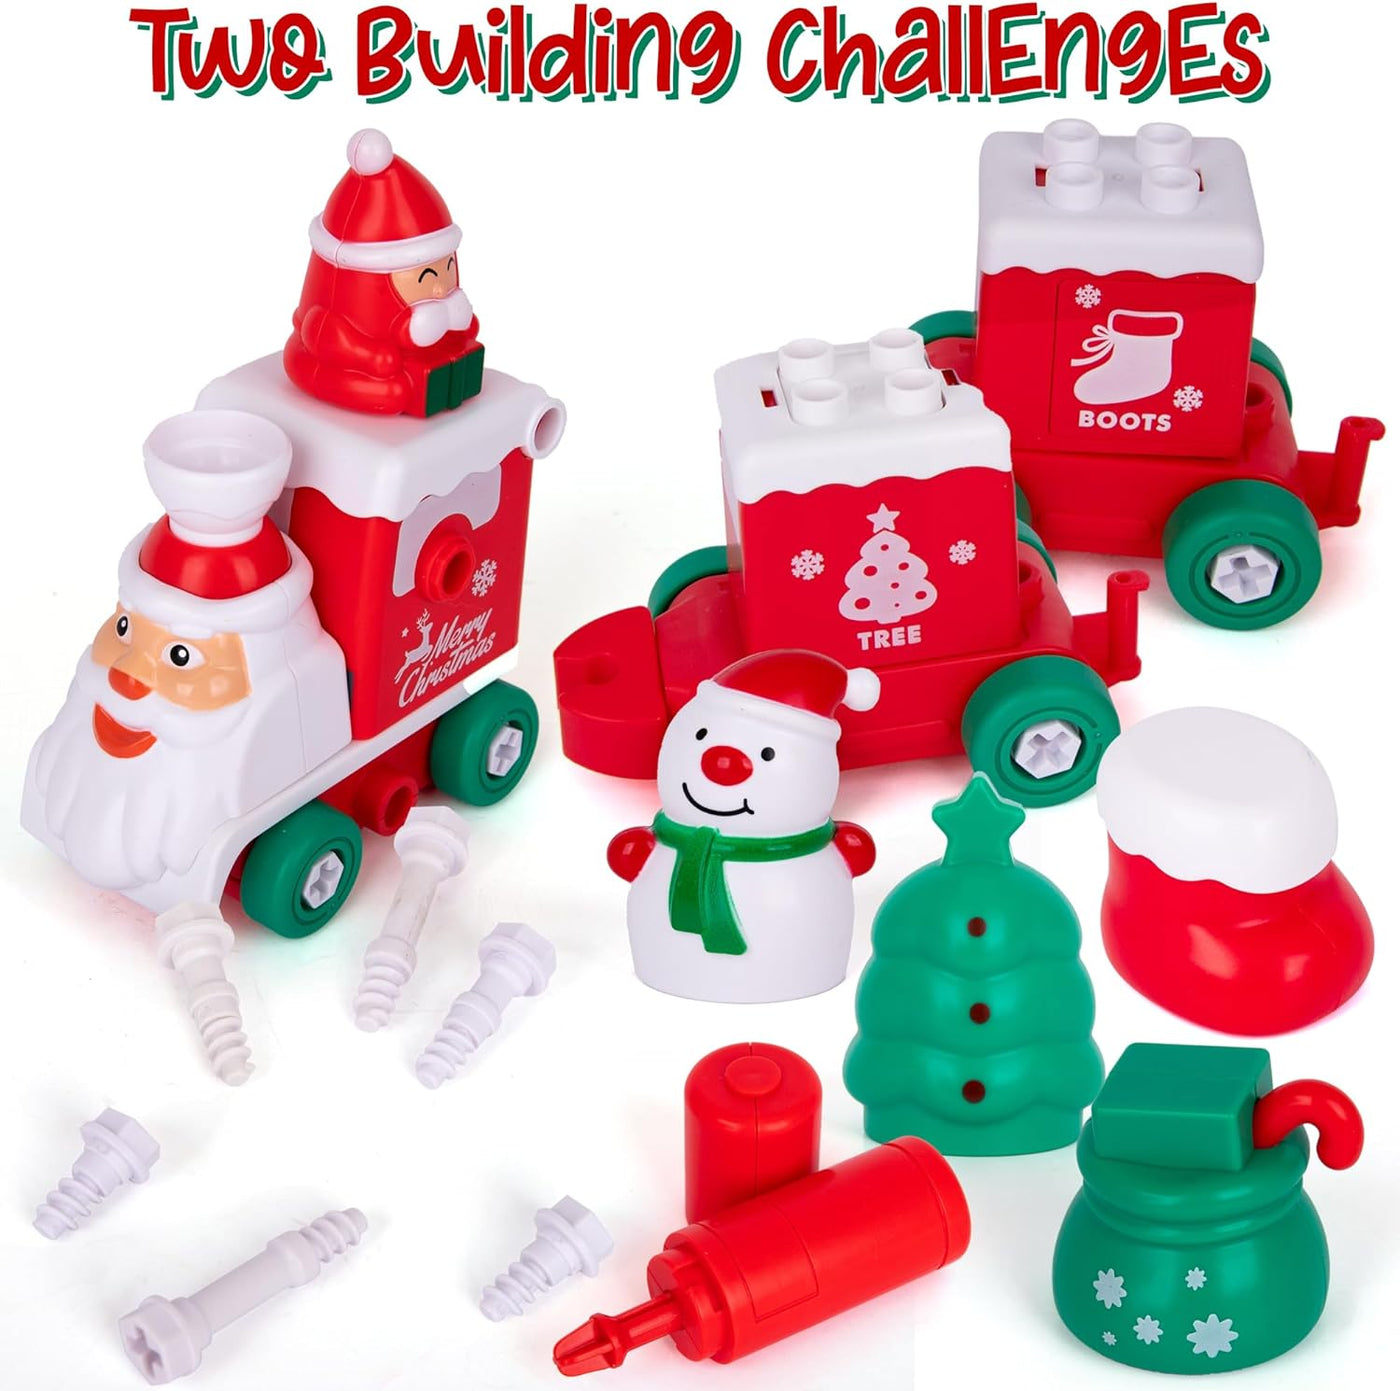 ArtCreativity 2 in 1 Christmas Transforming Train Set - 73-Piece Kit with Train and Robot Building Challenges - Entertaining Transforming Toys for Kids with Instructions for Ages 3 and Up